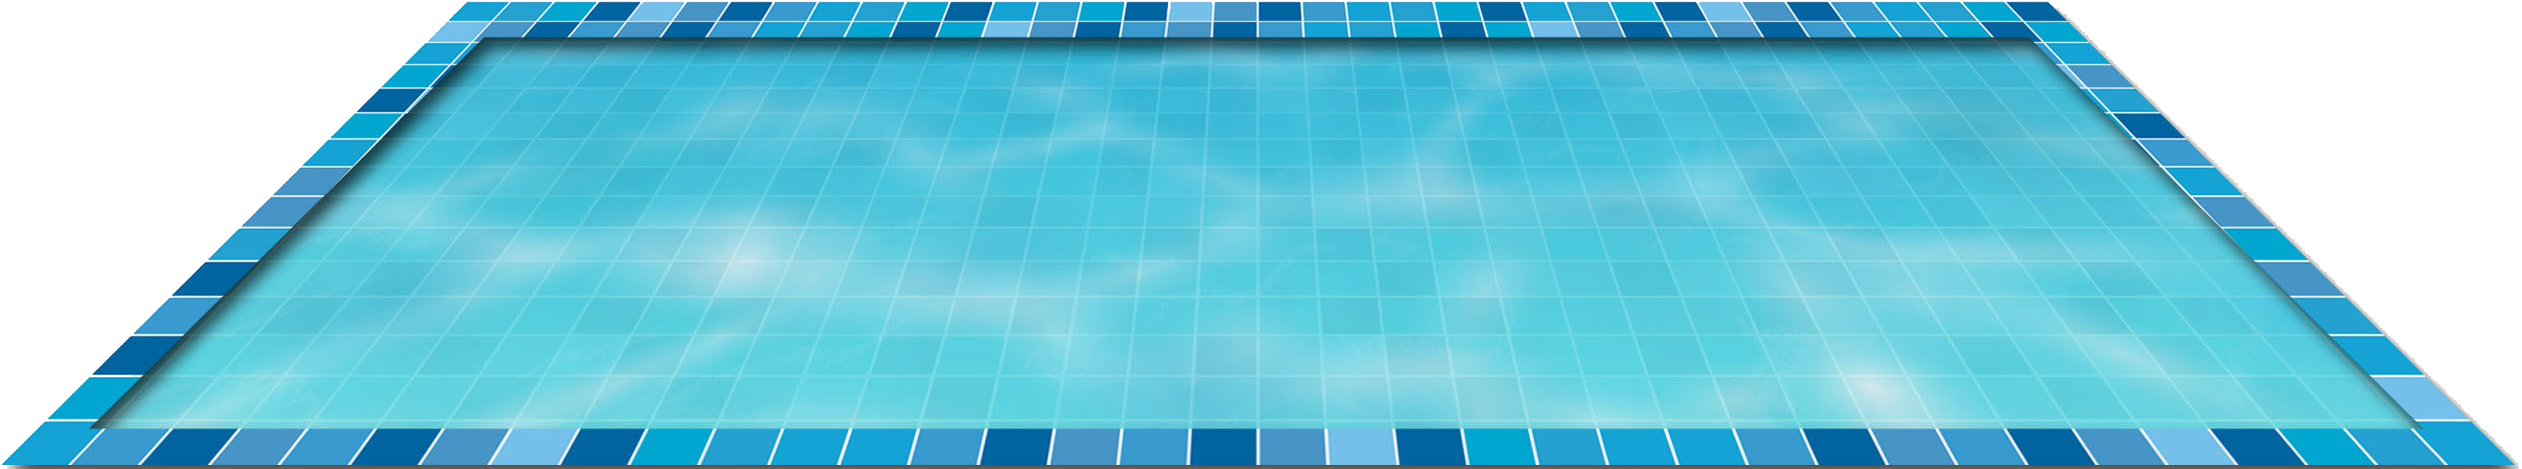 Swimming pool PNG Images.